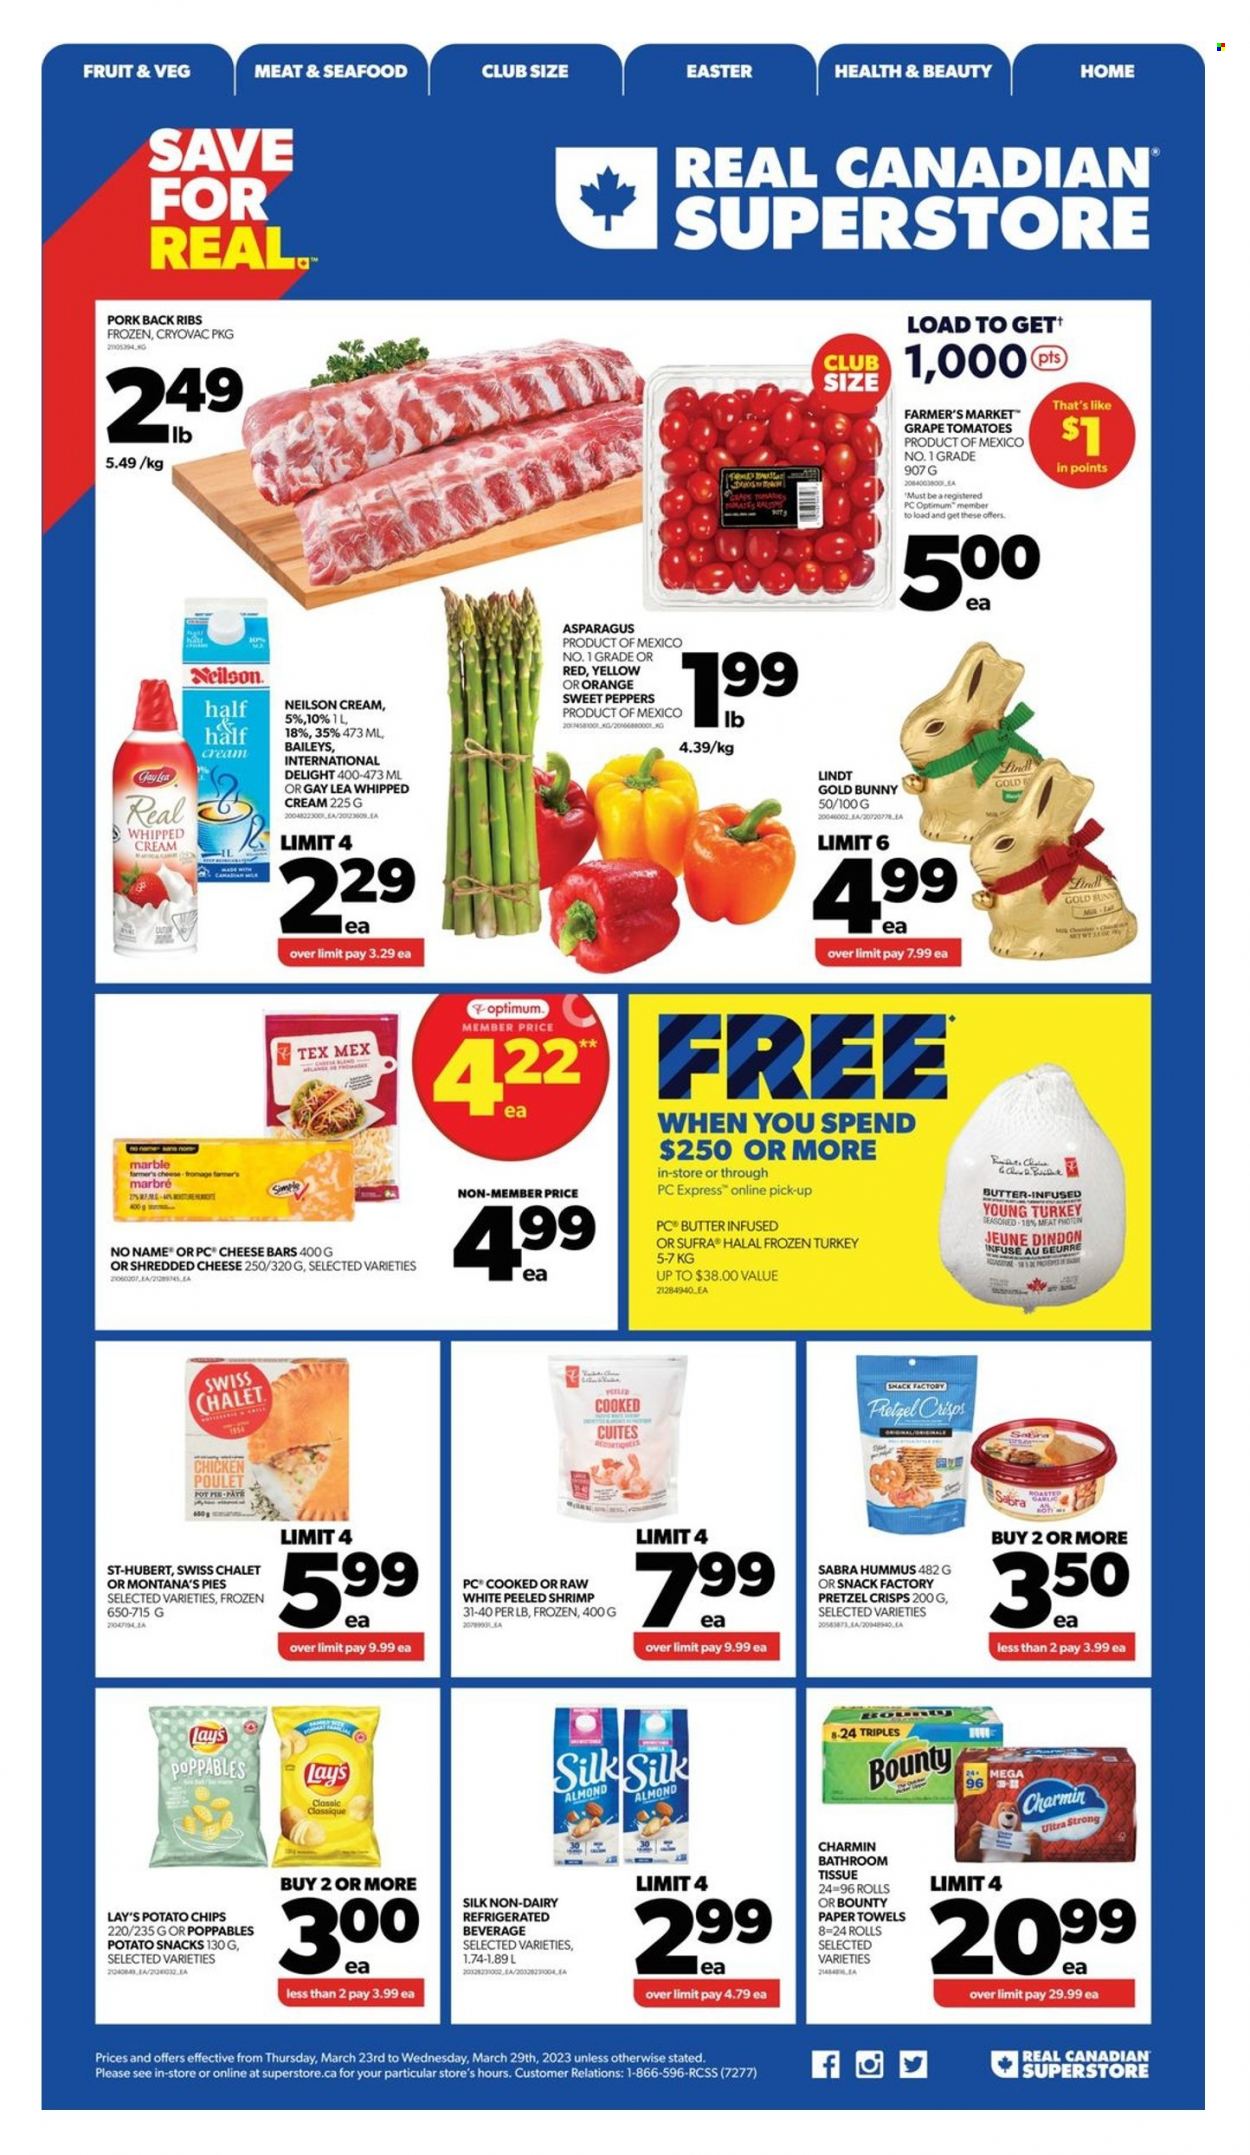 thumbnail - Real Canadian Superstore Flyer - March 23, 2023 - March 29, 2023 - Sales products - pie, pot pie, asparagus, sweet peppers, tomatoes, peppers, oranges, No Name, hummus, shredded cheese, butter, whipped cream, Bounty, potato chips, Lay’s, pretzel crisps, Baileys, dried fruit, whole turkey, chicken, turkey, ribs, pork meat, pork ribs, pork back ribs, bath tissue, kitchen towels, paper towels, Charmin, pot, Optimum, raisins, Lindt. Page 1.